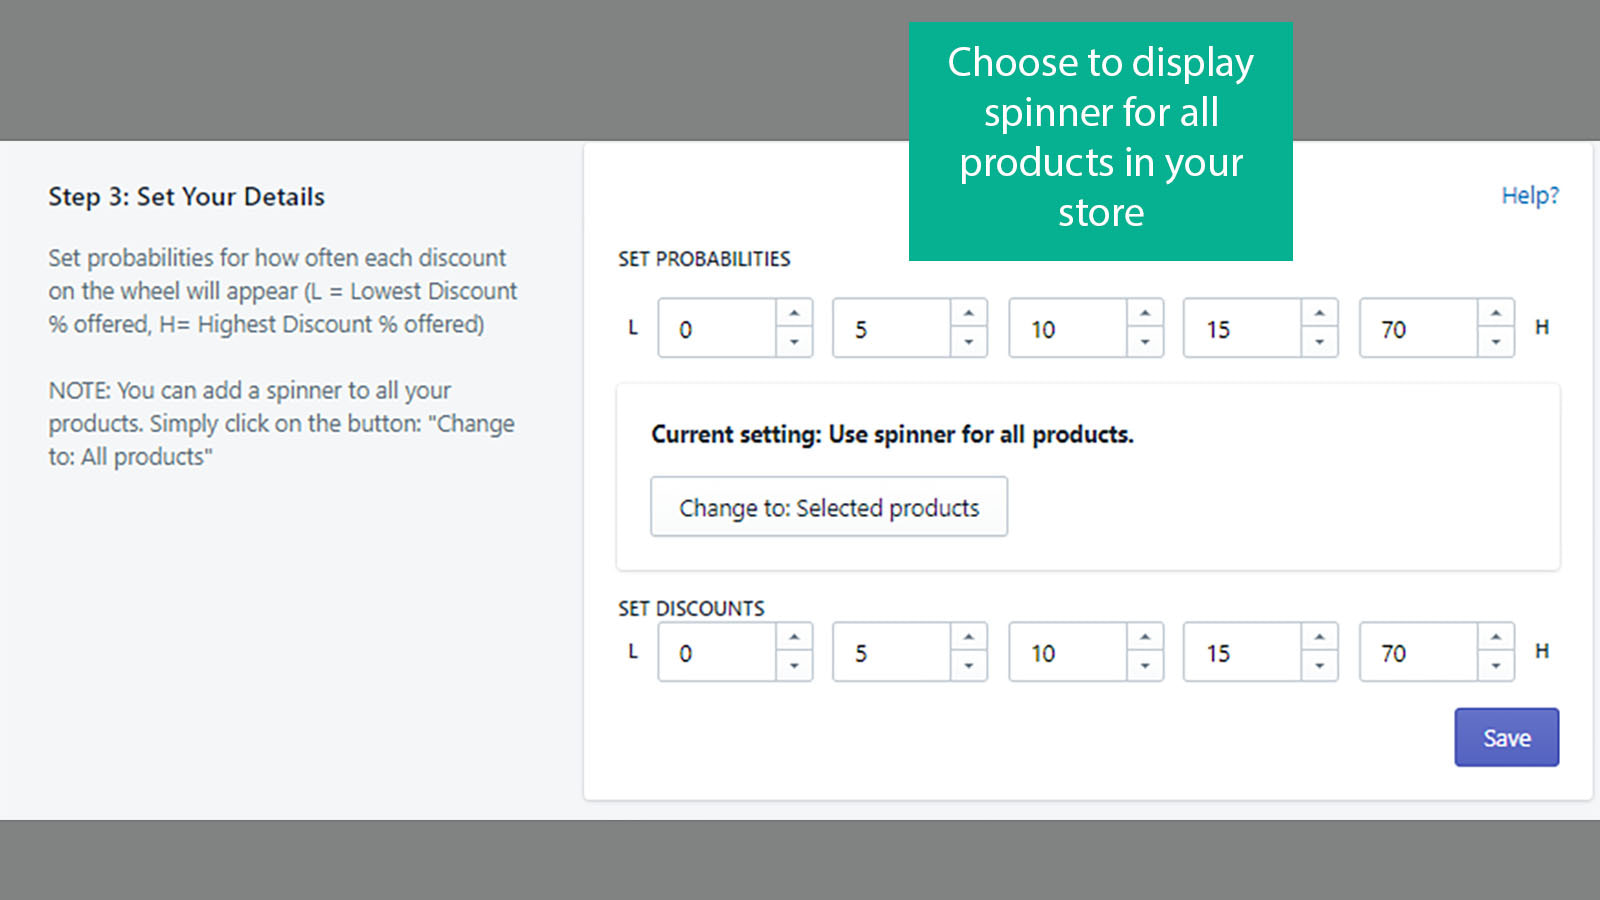 You can show spinner for all your products